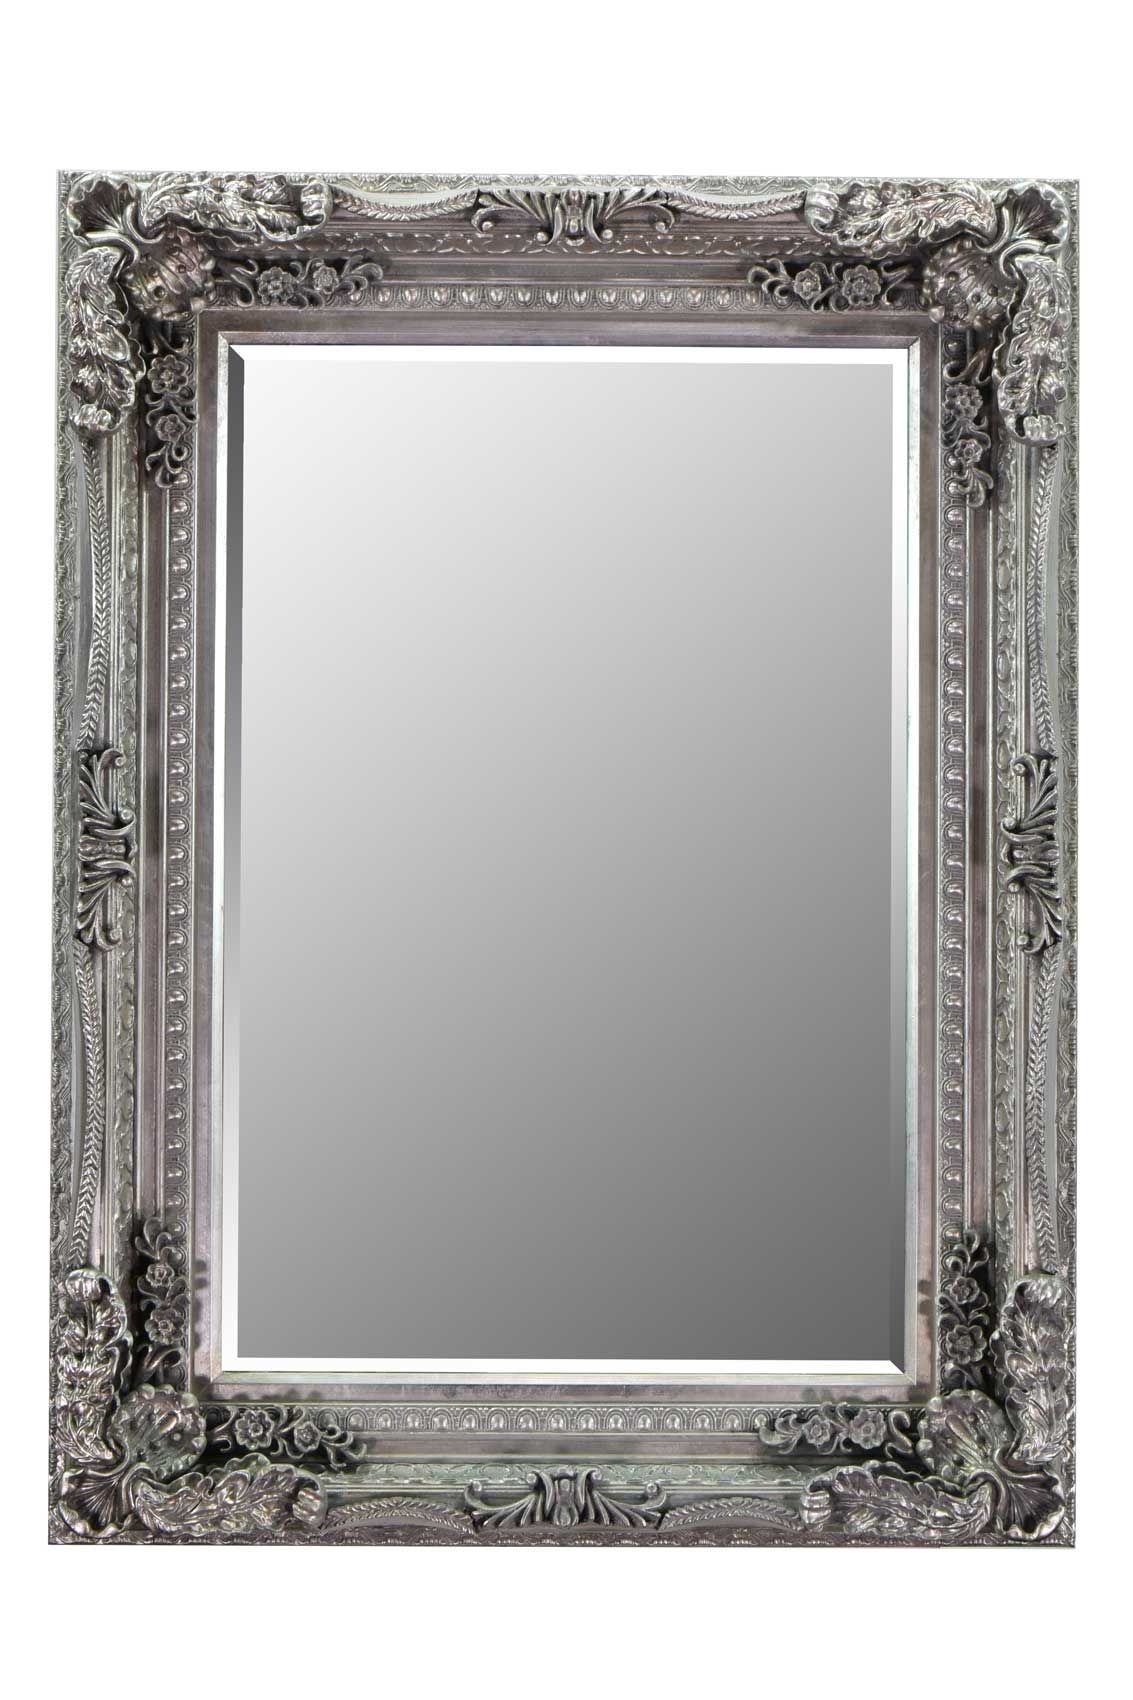 Bordeaux Silver Ornate Wall Mirror 24X36 – Ayers And Graces With Silver High Wall Mirrors (View 6 of 15)